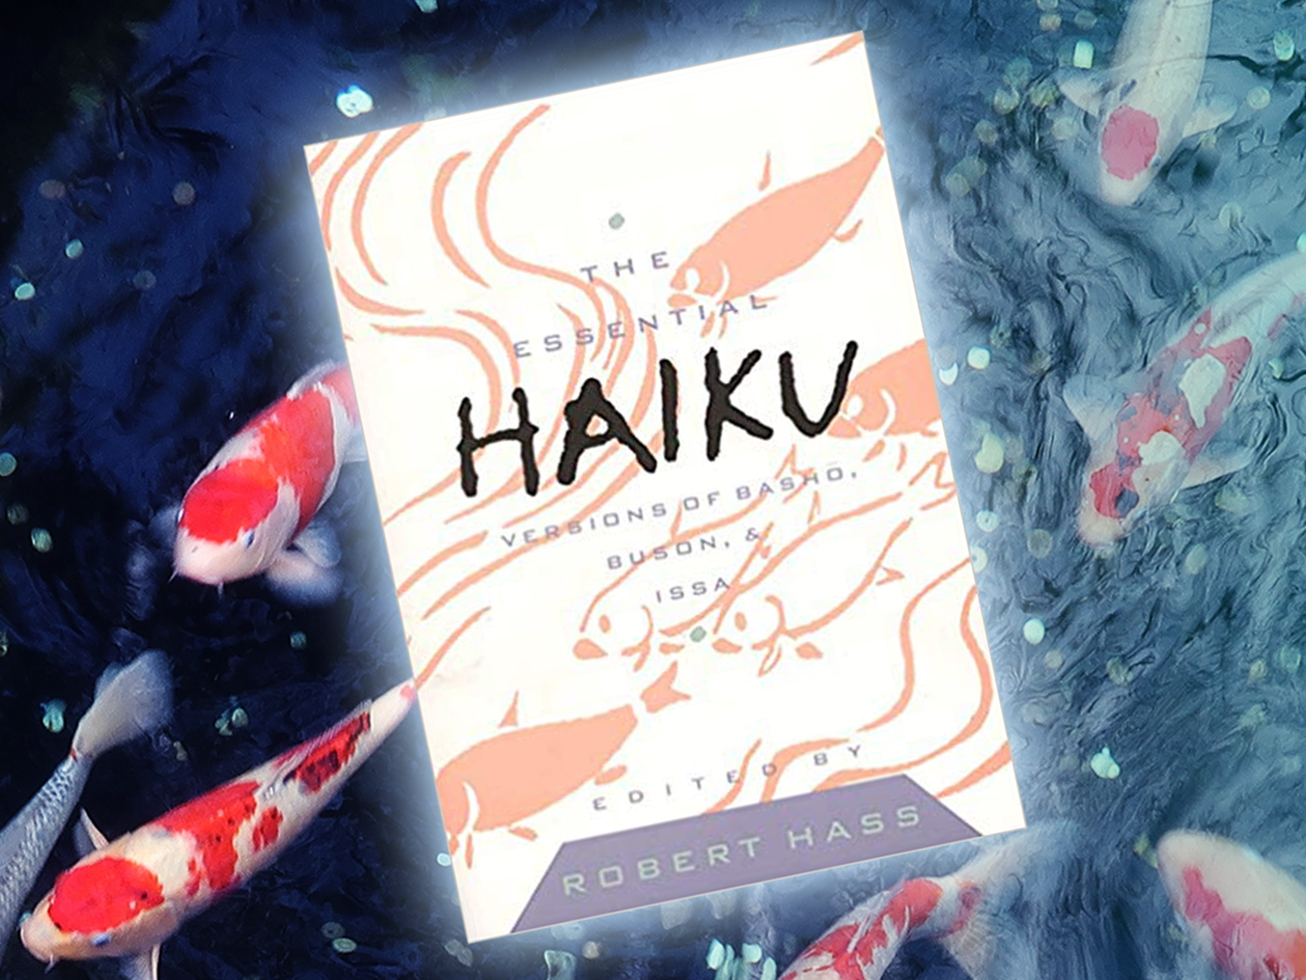 Cover of The Essential Haiku, edited by Robert Hass, with koi fish